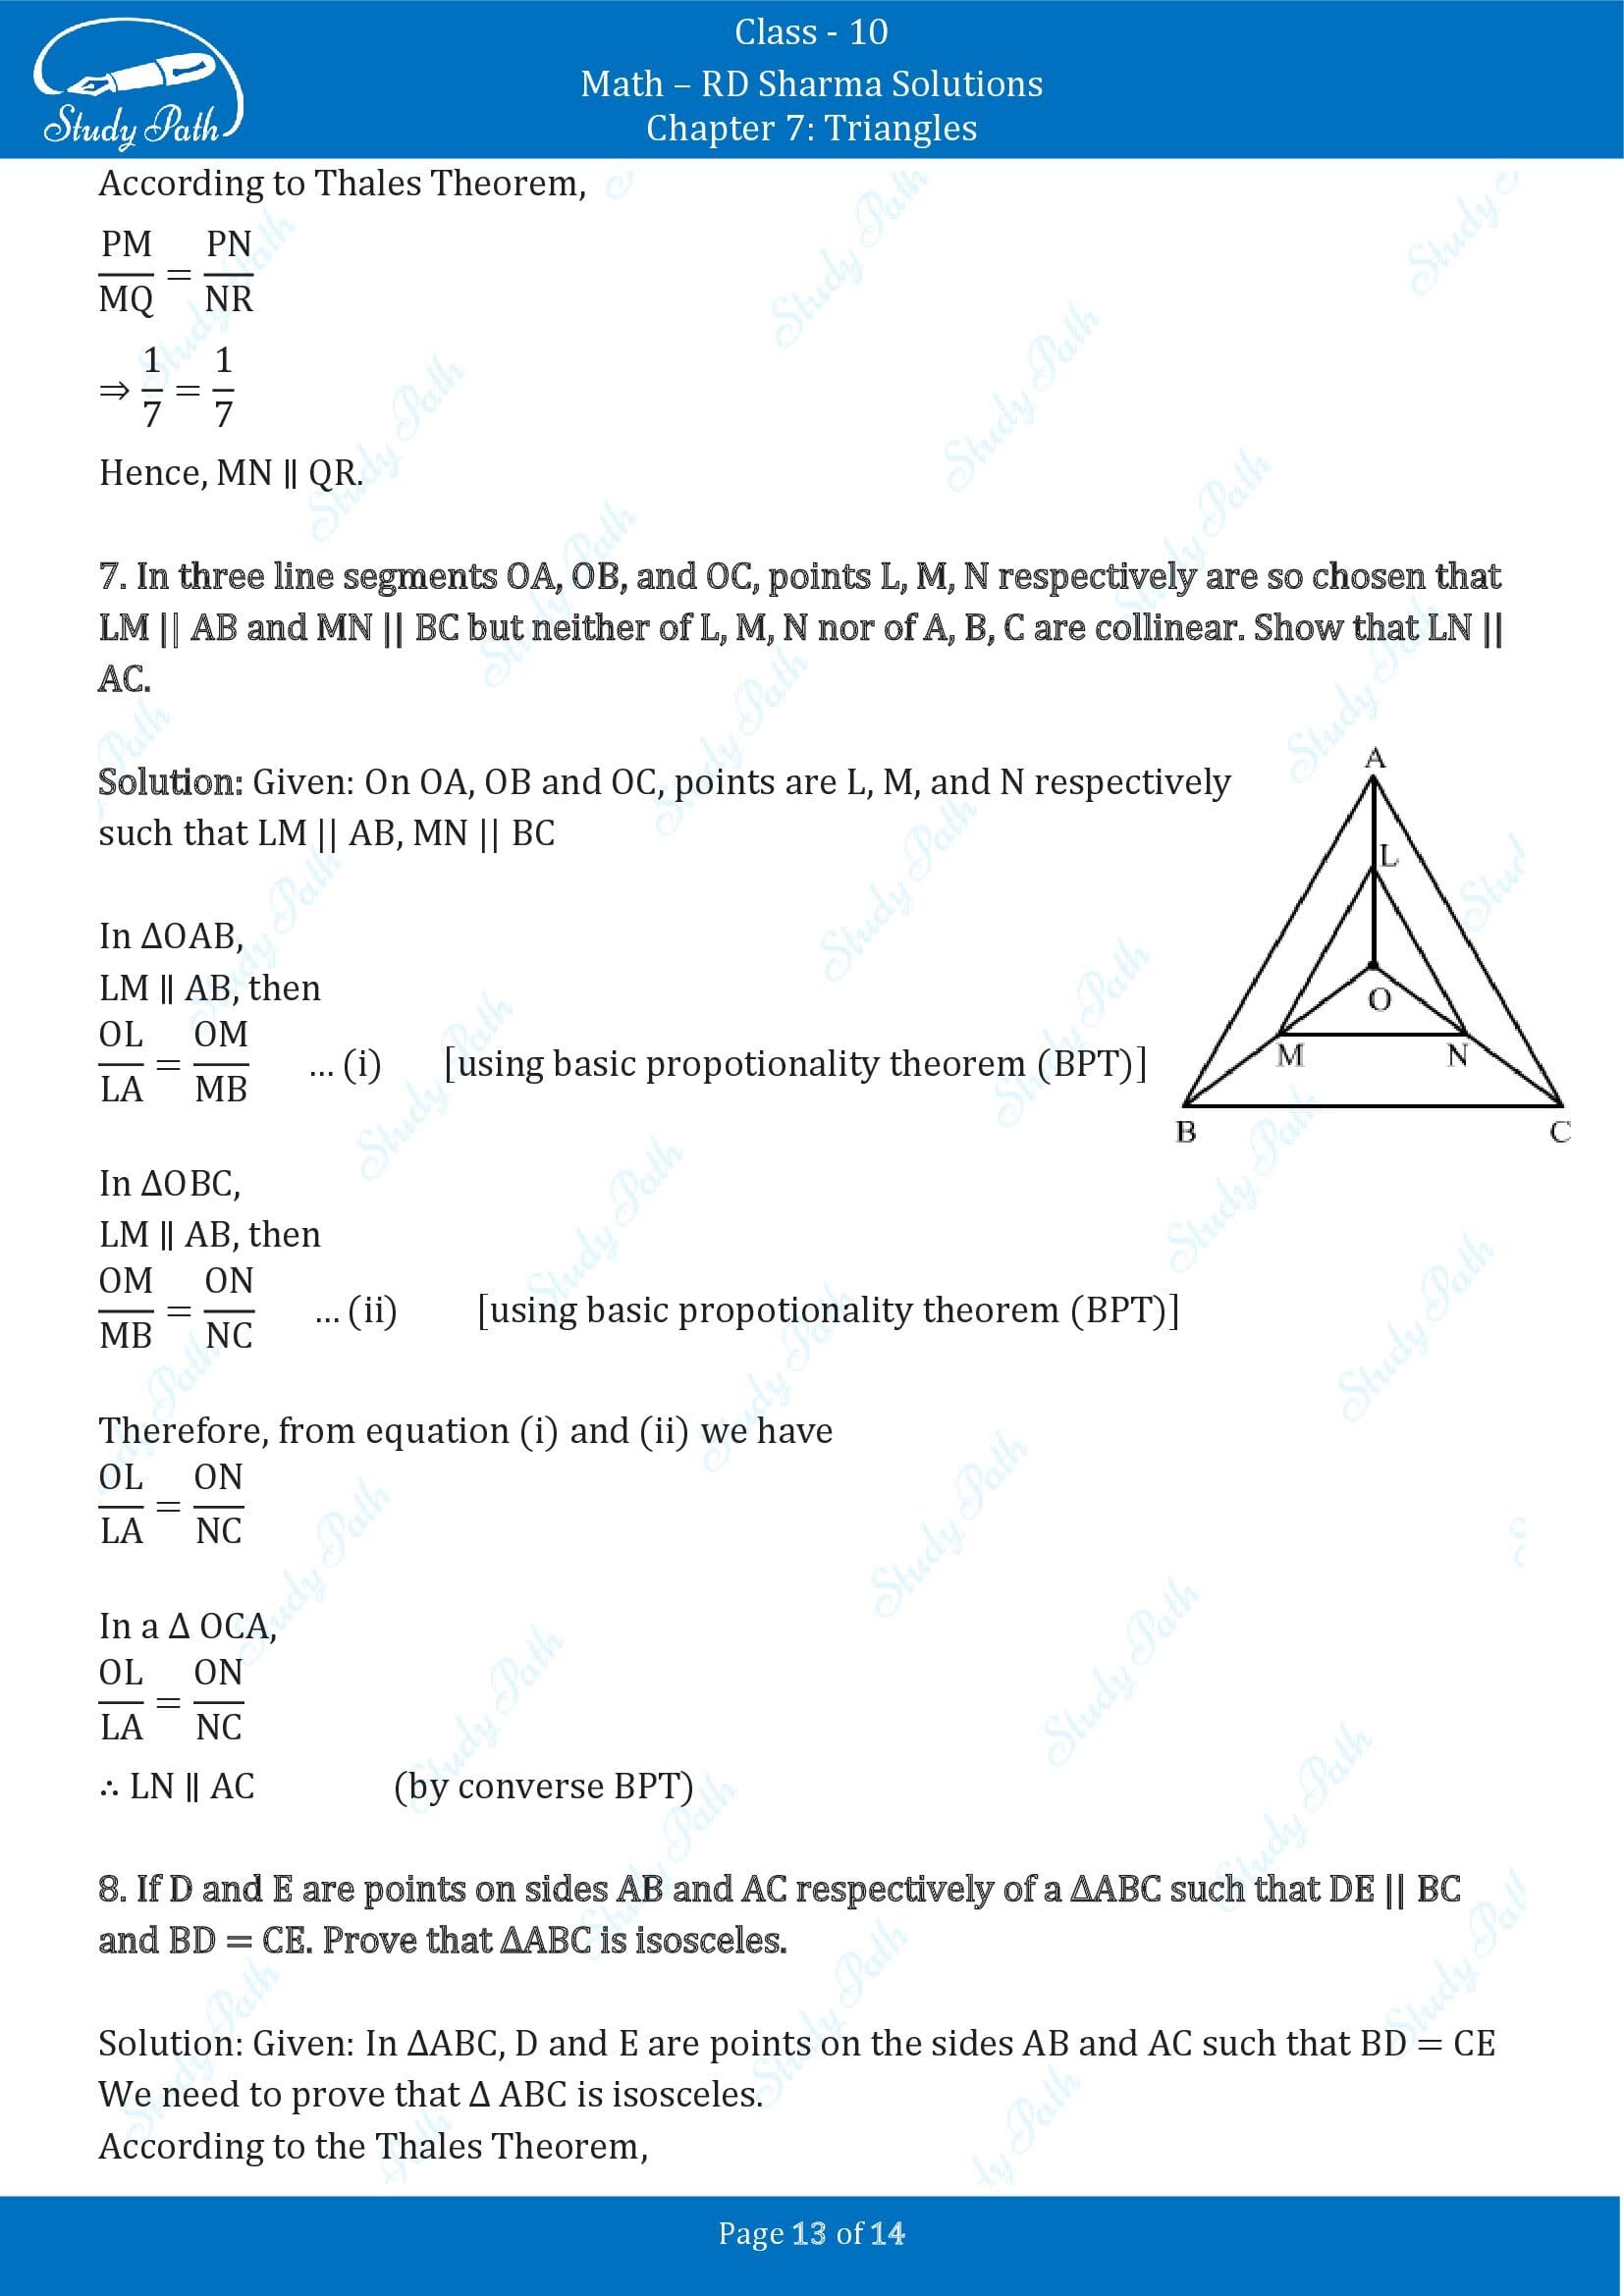 RD Sharma Solutions Class 10 Chapter 7 Triangles Exercise 7.2 00013